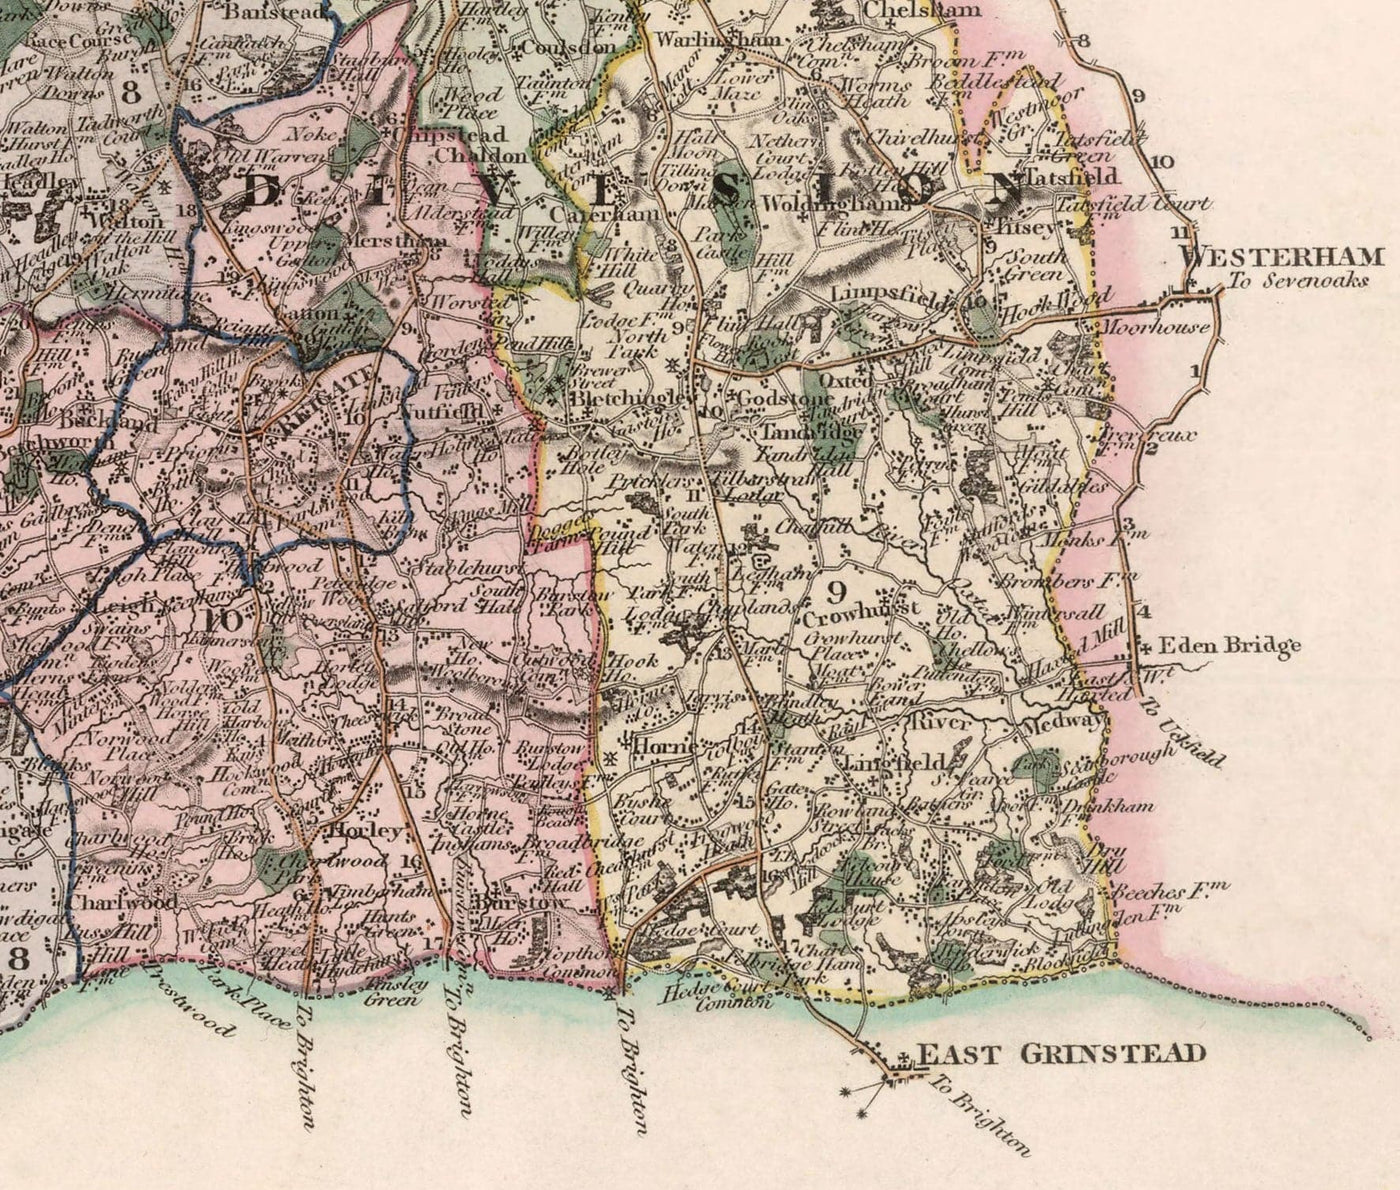 Old Map of Surrey 1829 by Greenwood & Co. - Woking, Guildford, Croydon, Richmond